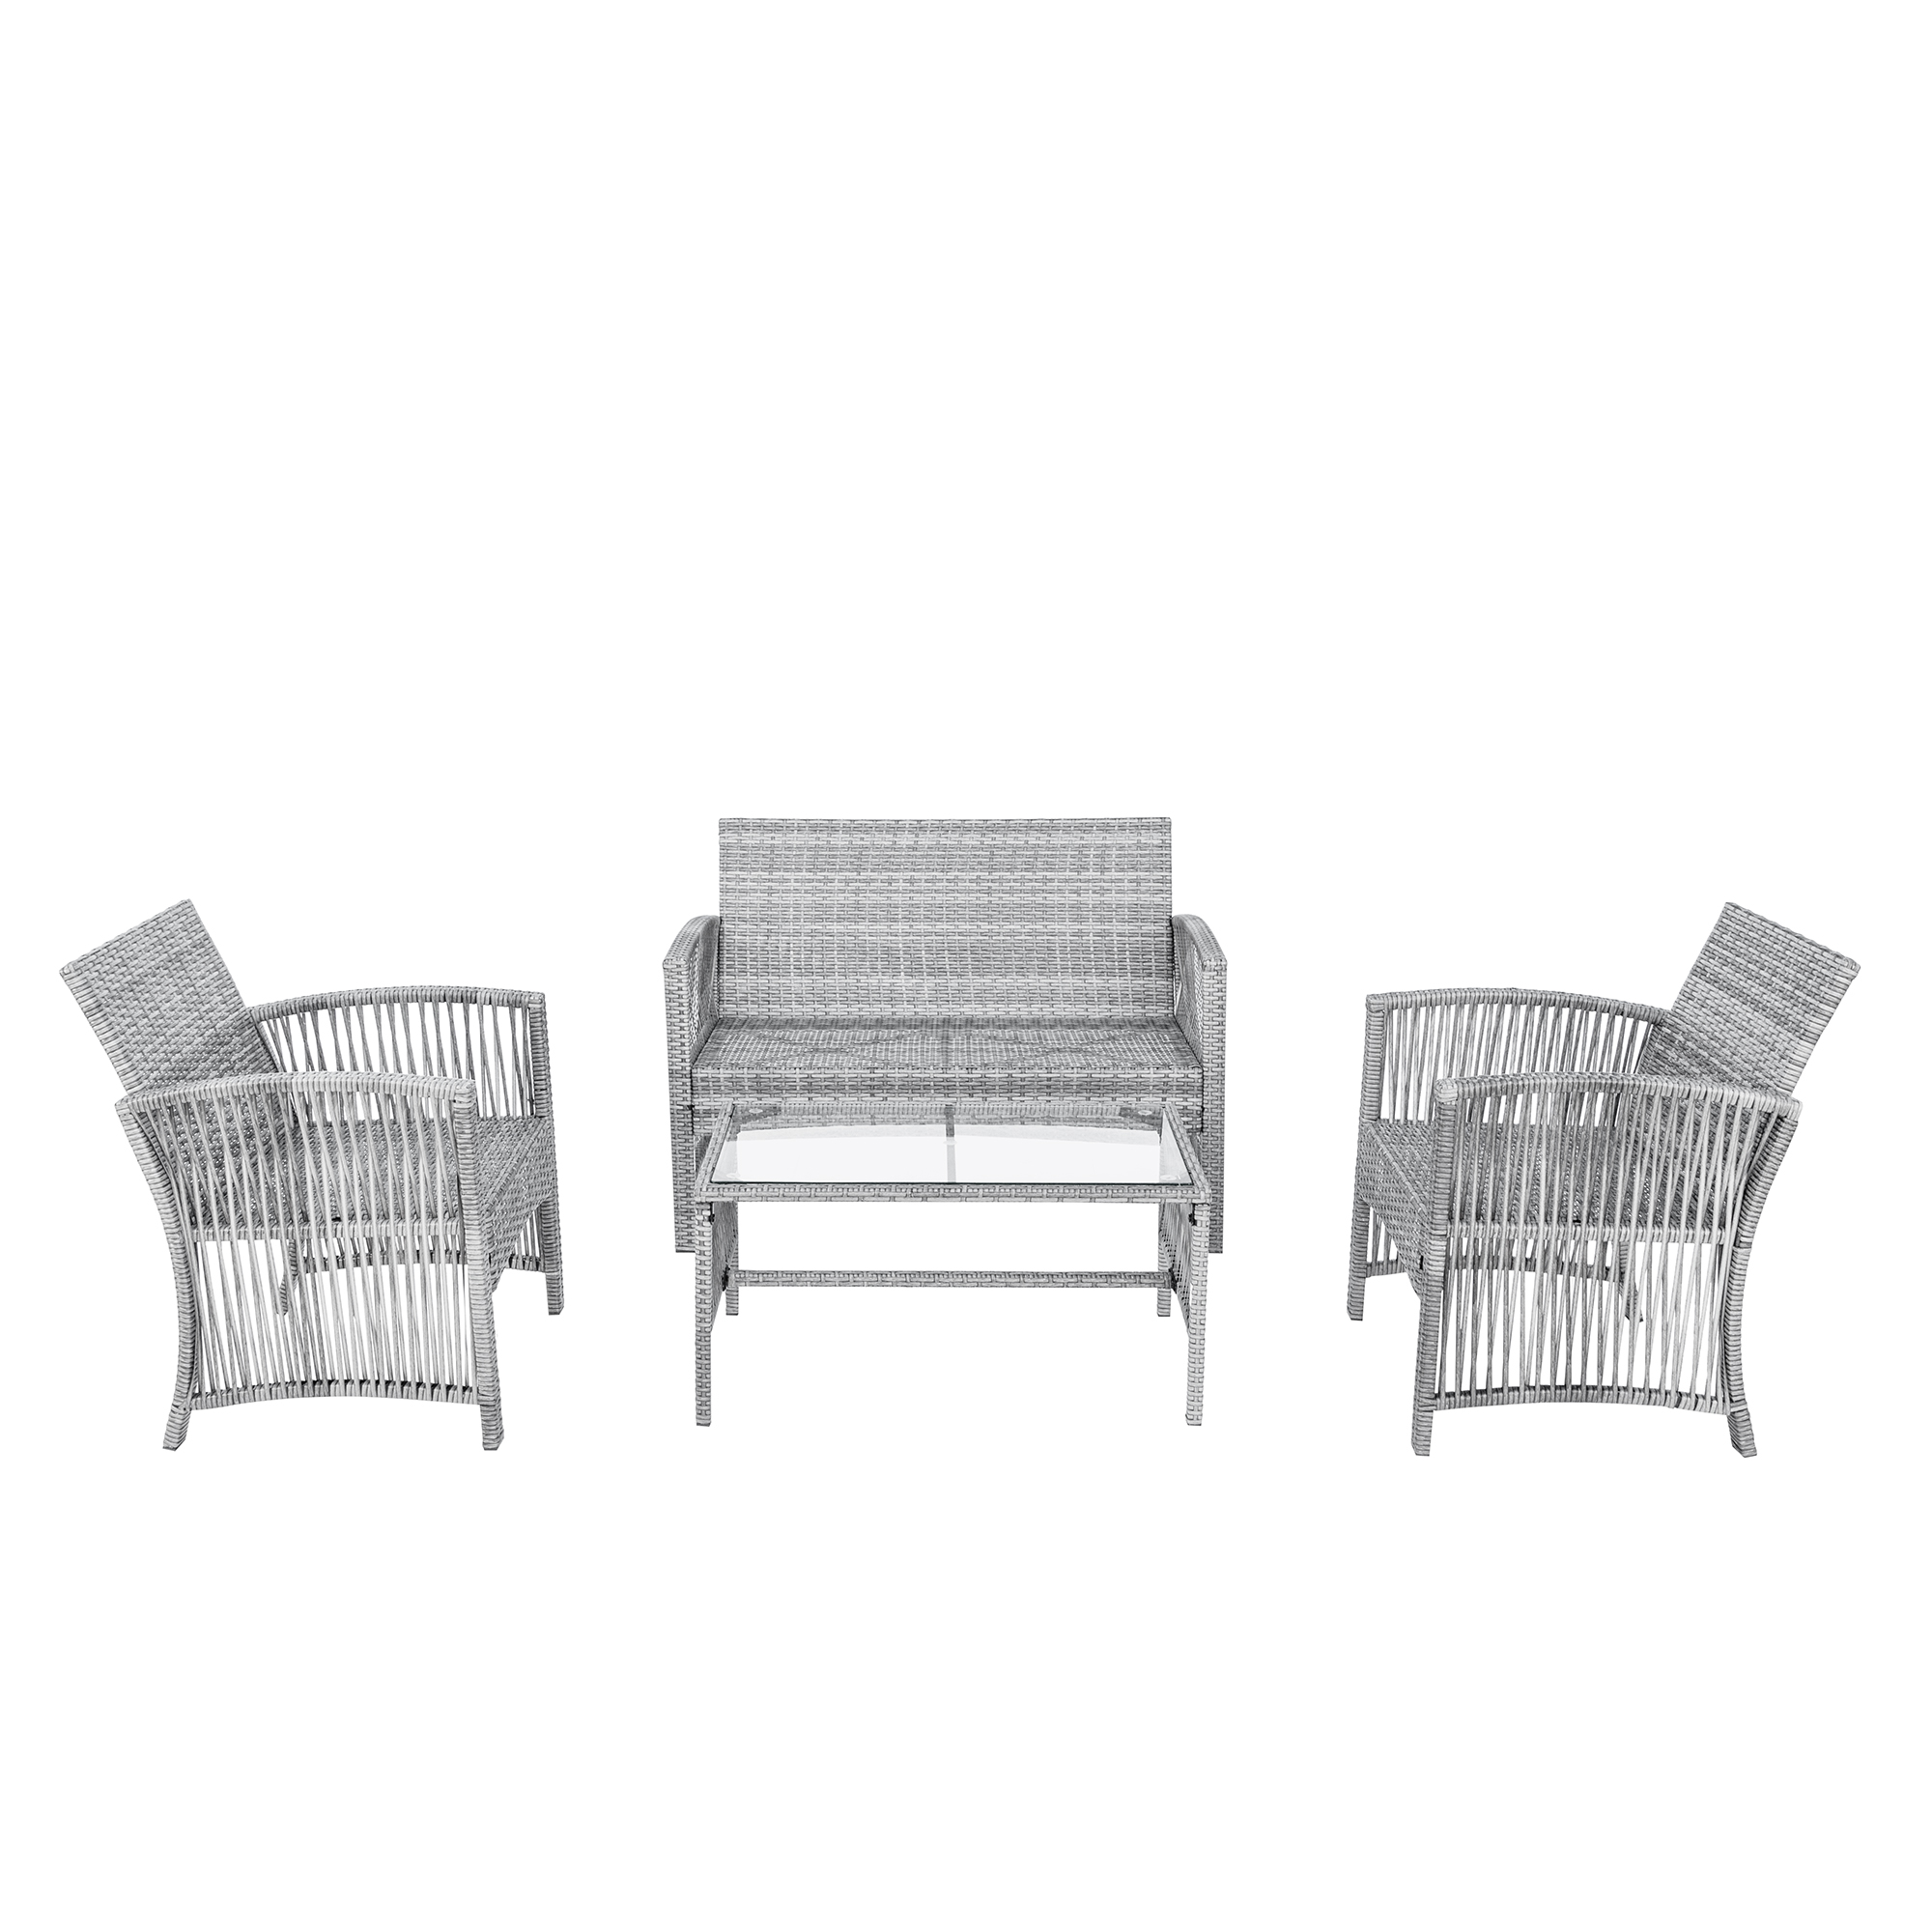 Outdoor Patio Furniture Sets, 4 Piece Gray Wicker Outdoor Porch Conversation Sets, 2pcs Arm Chairs, 1pc Loveseat&Coffee Table, Patio Bar Set, Dining Set for Backyard Lawn Porch Poolside Garden, W7776 - image 5 of 11